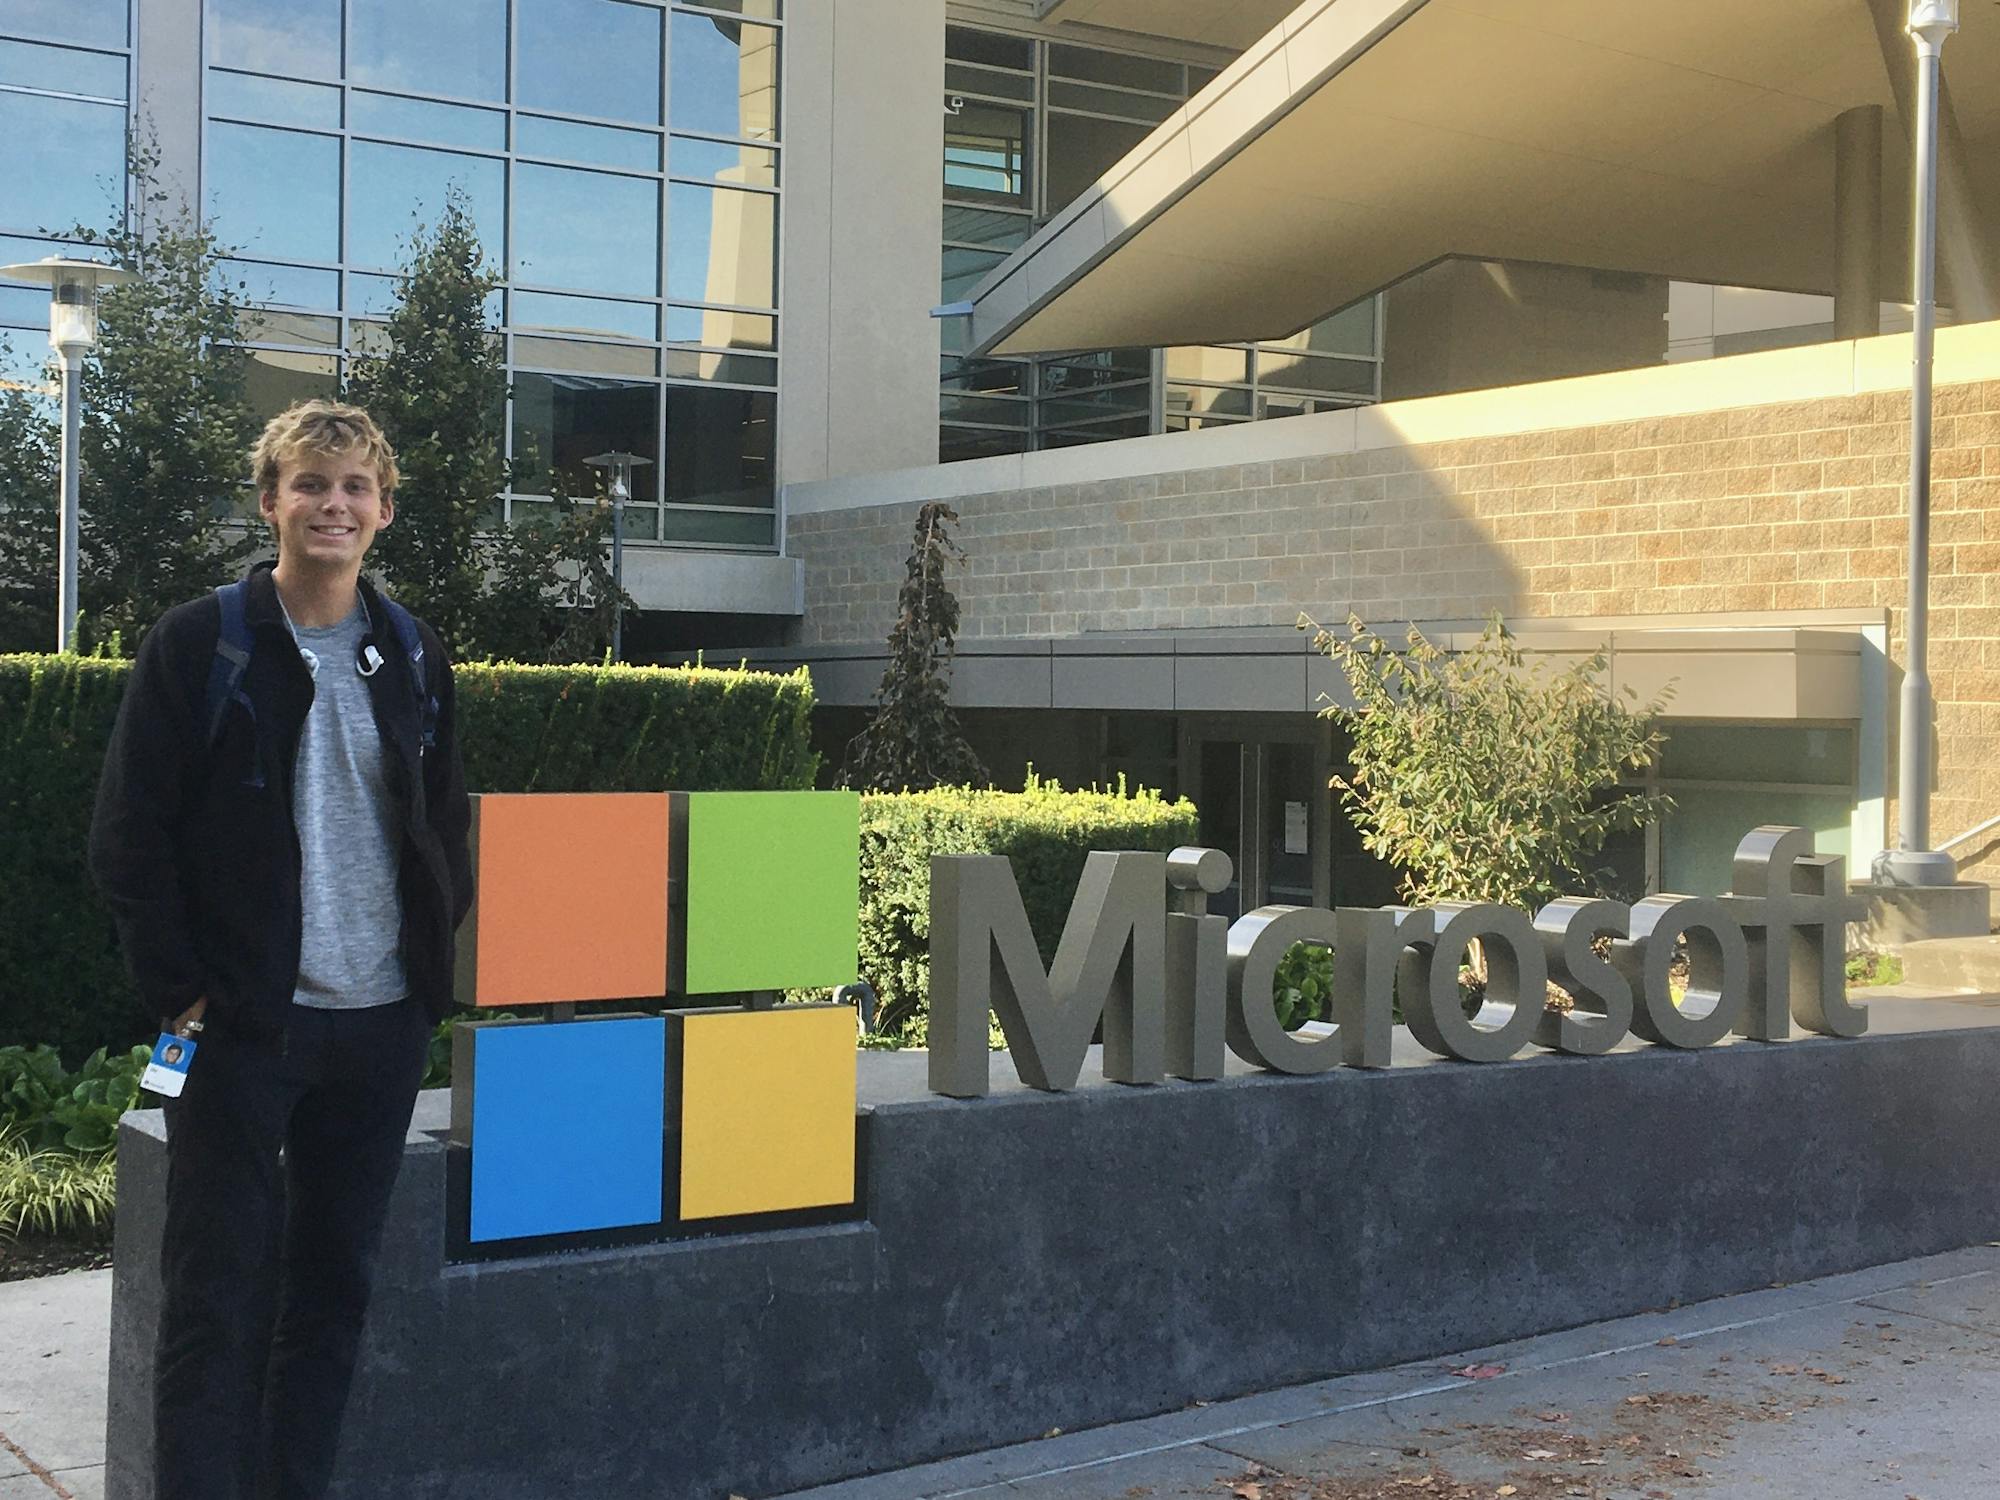 A blonde man in sneakers, a jacket, and a grey t-shirt poses in front of the Microsoft logo